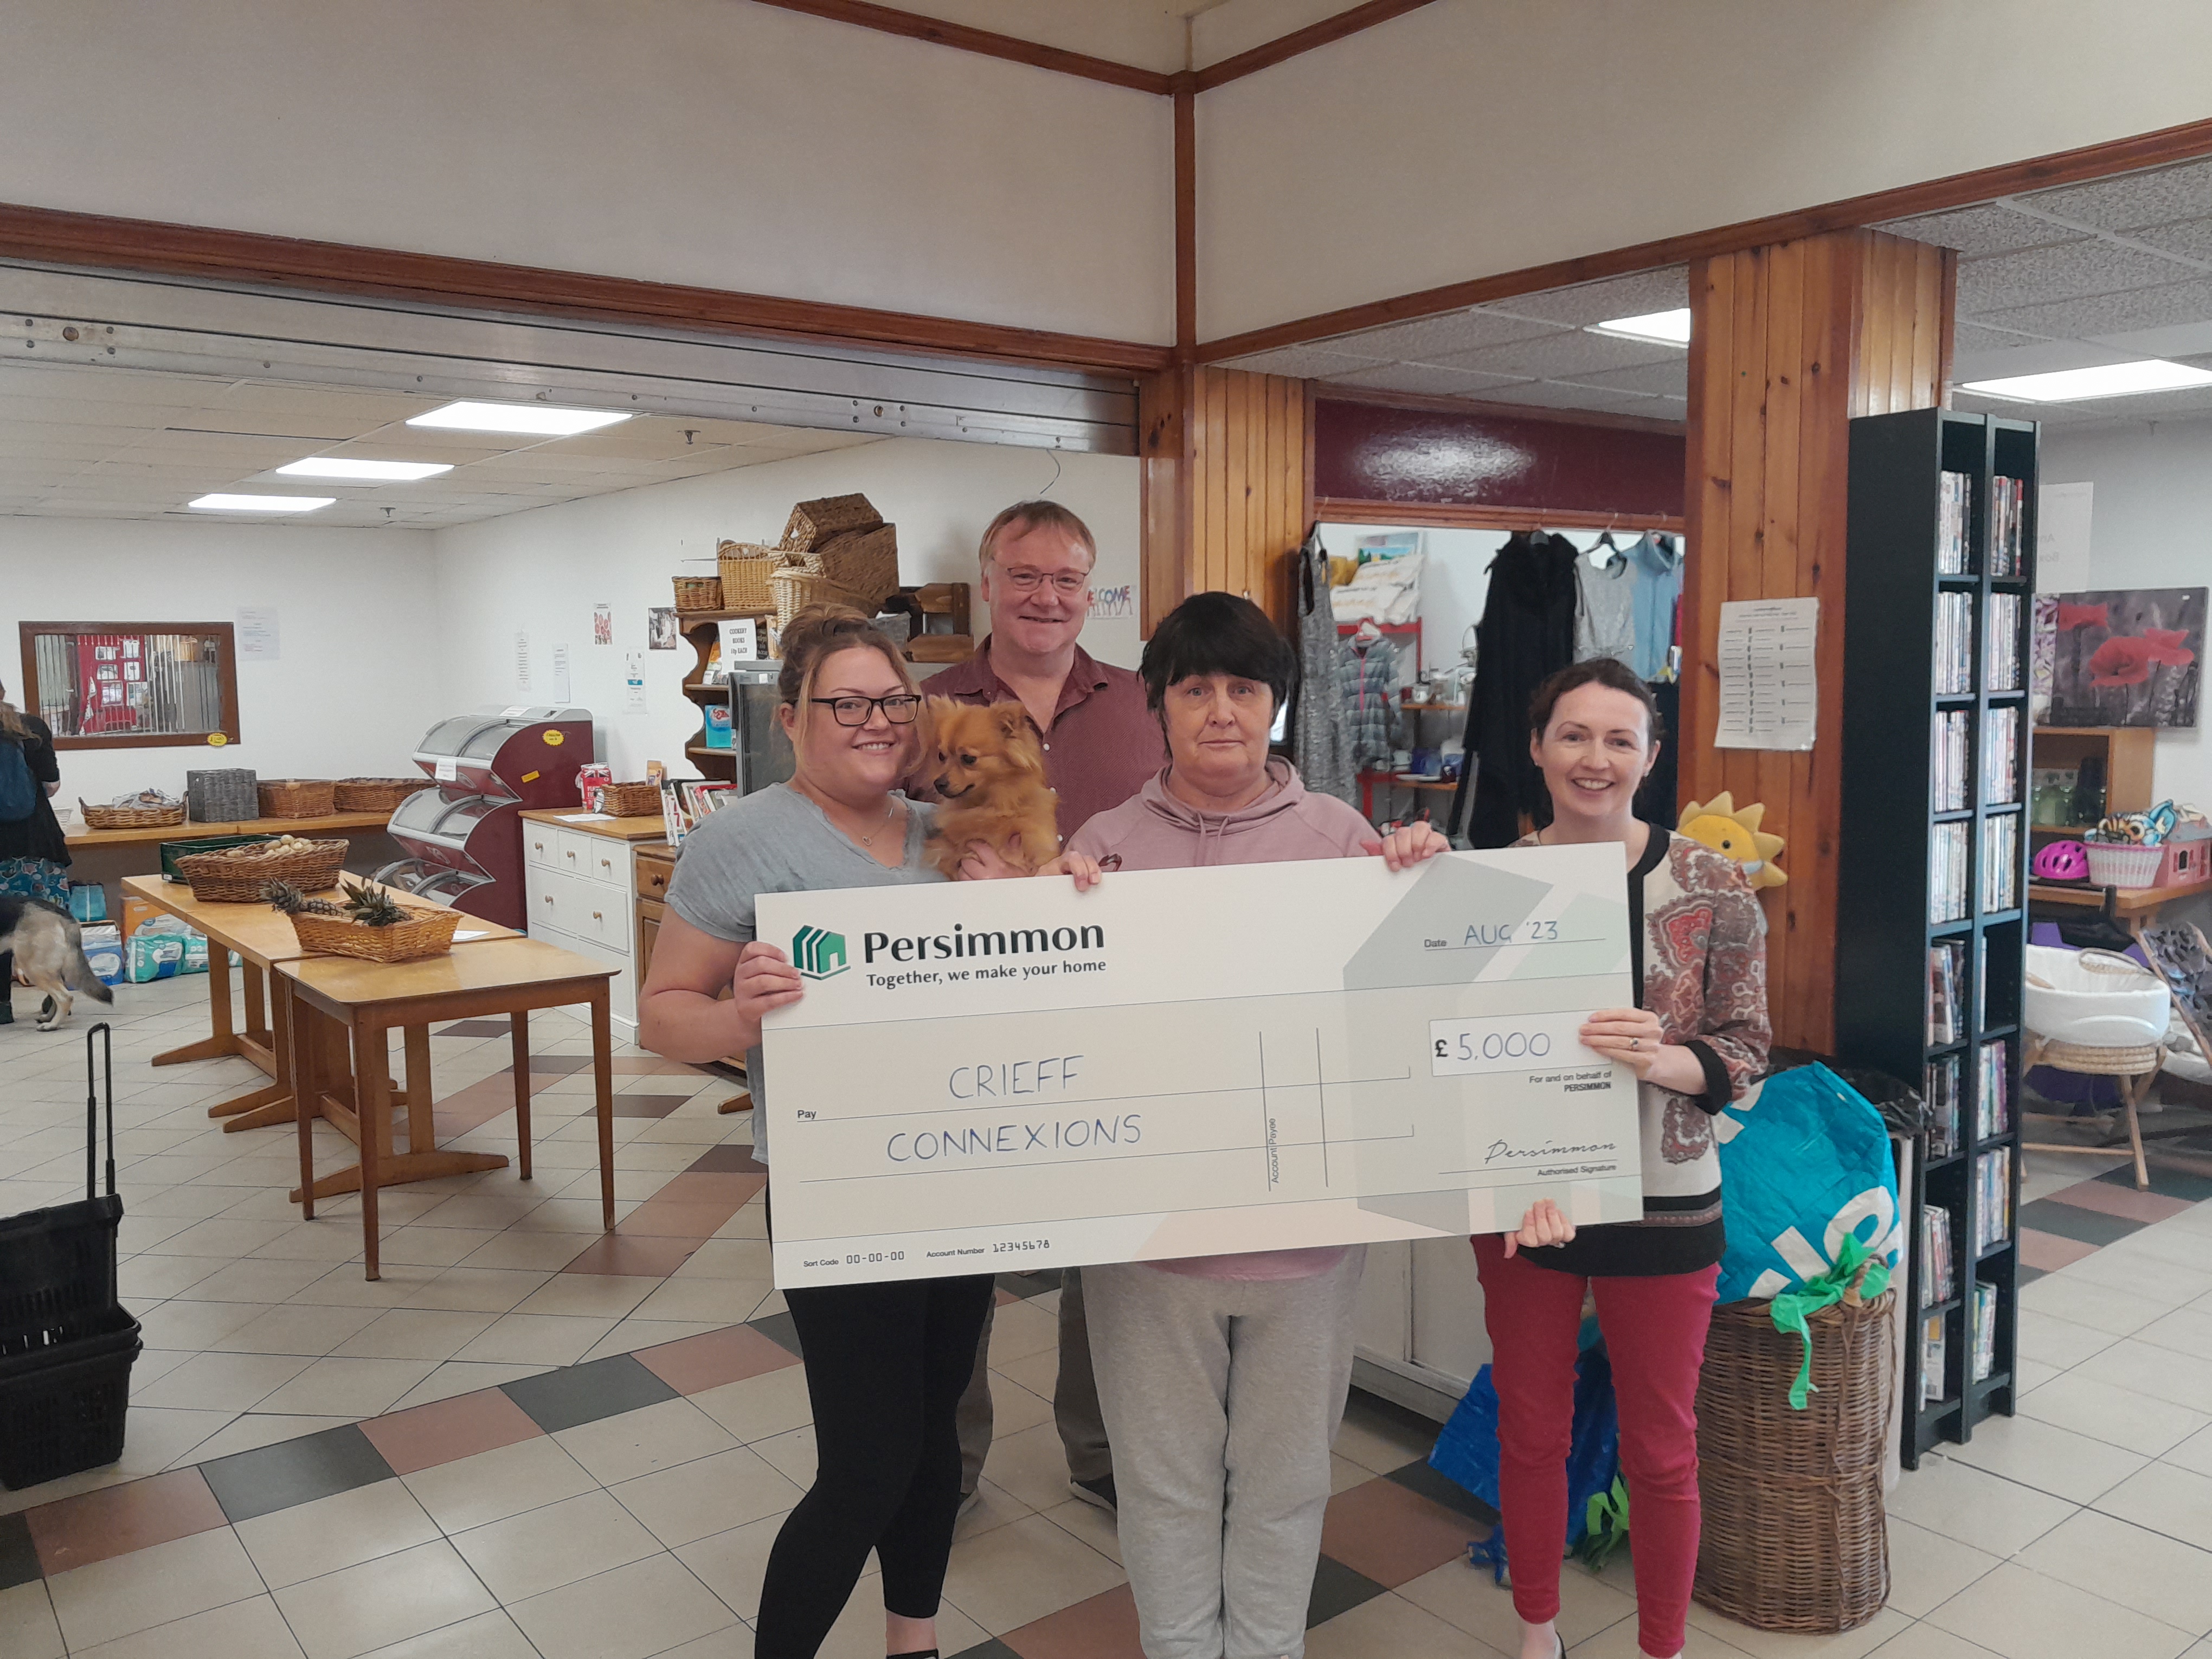 Crieff Connexions cashes community champions cheque from Persimmon